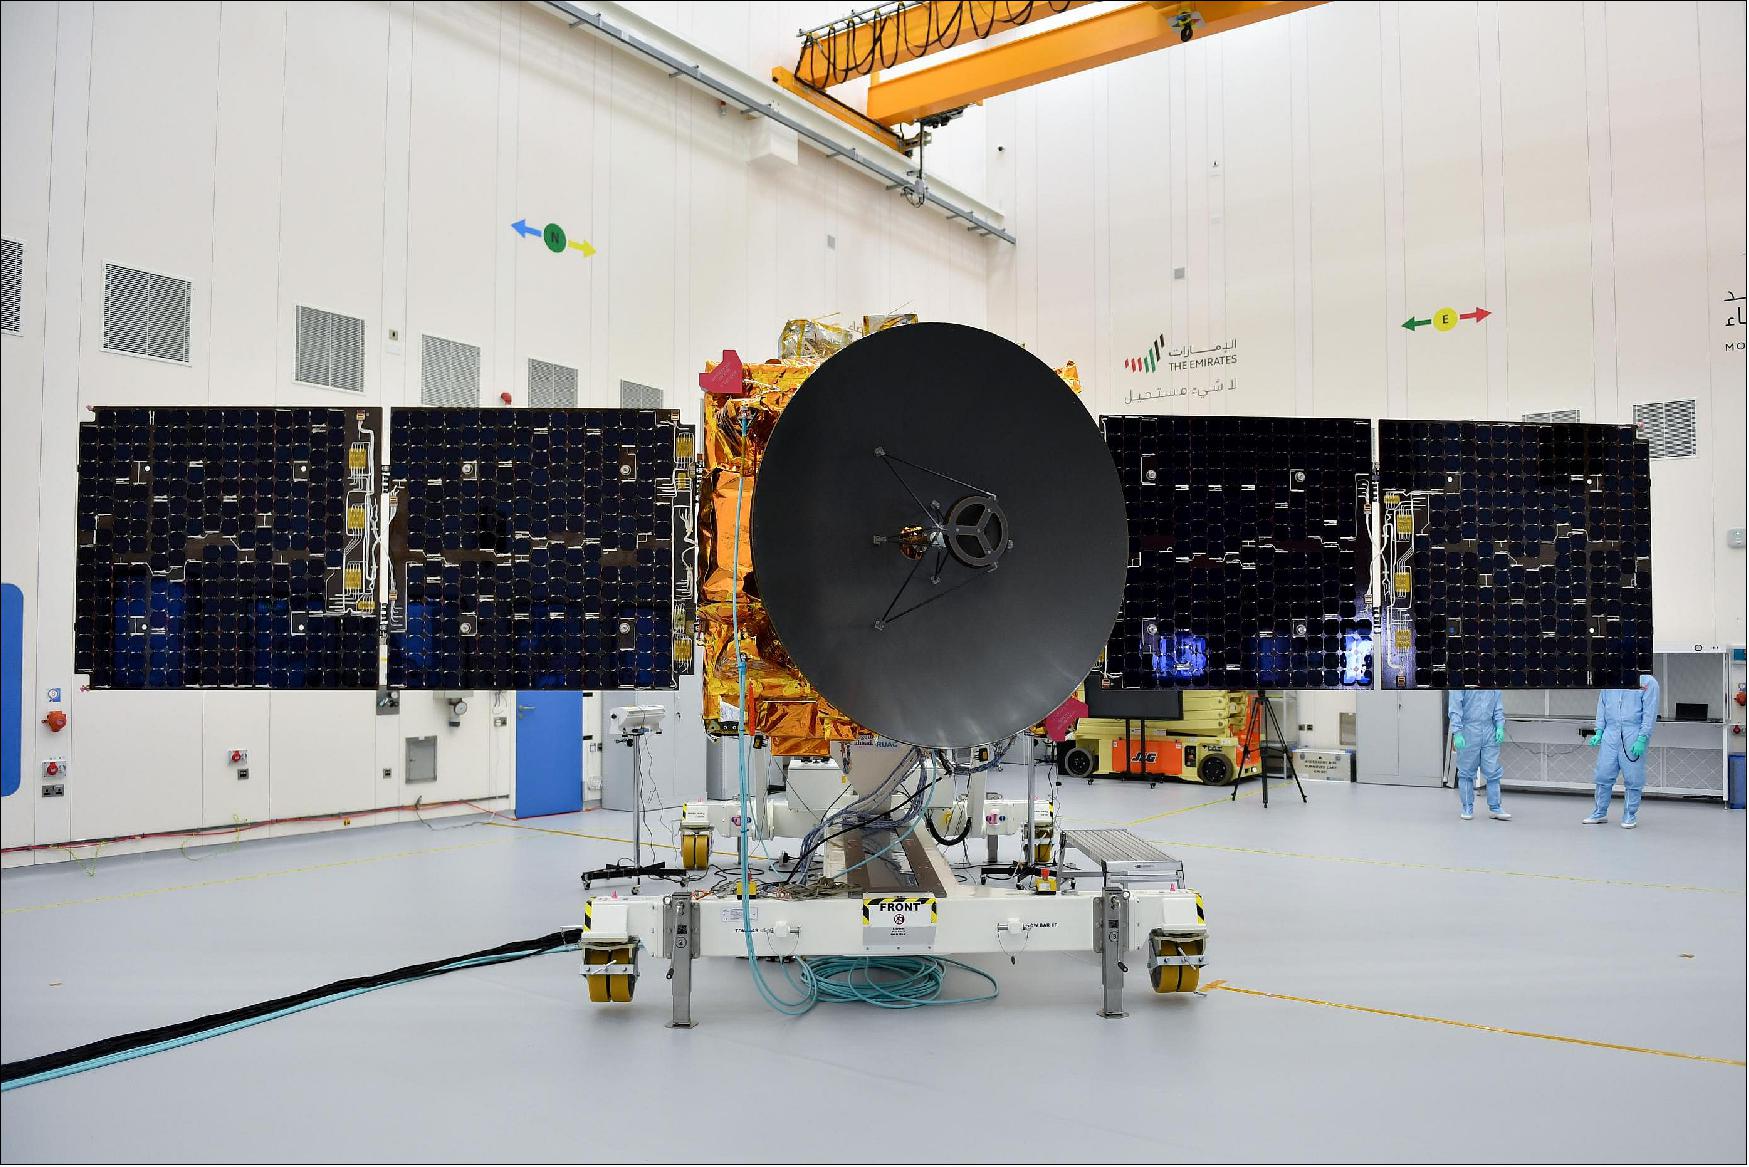 Figure 4: Photo of the deployed EMM Hope spacecraft at MBRSC prior to shipment (image credit: AETOSWire)